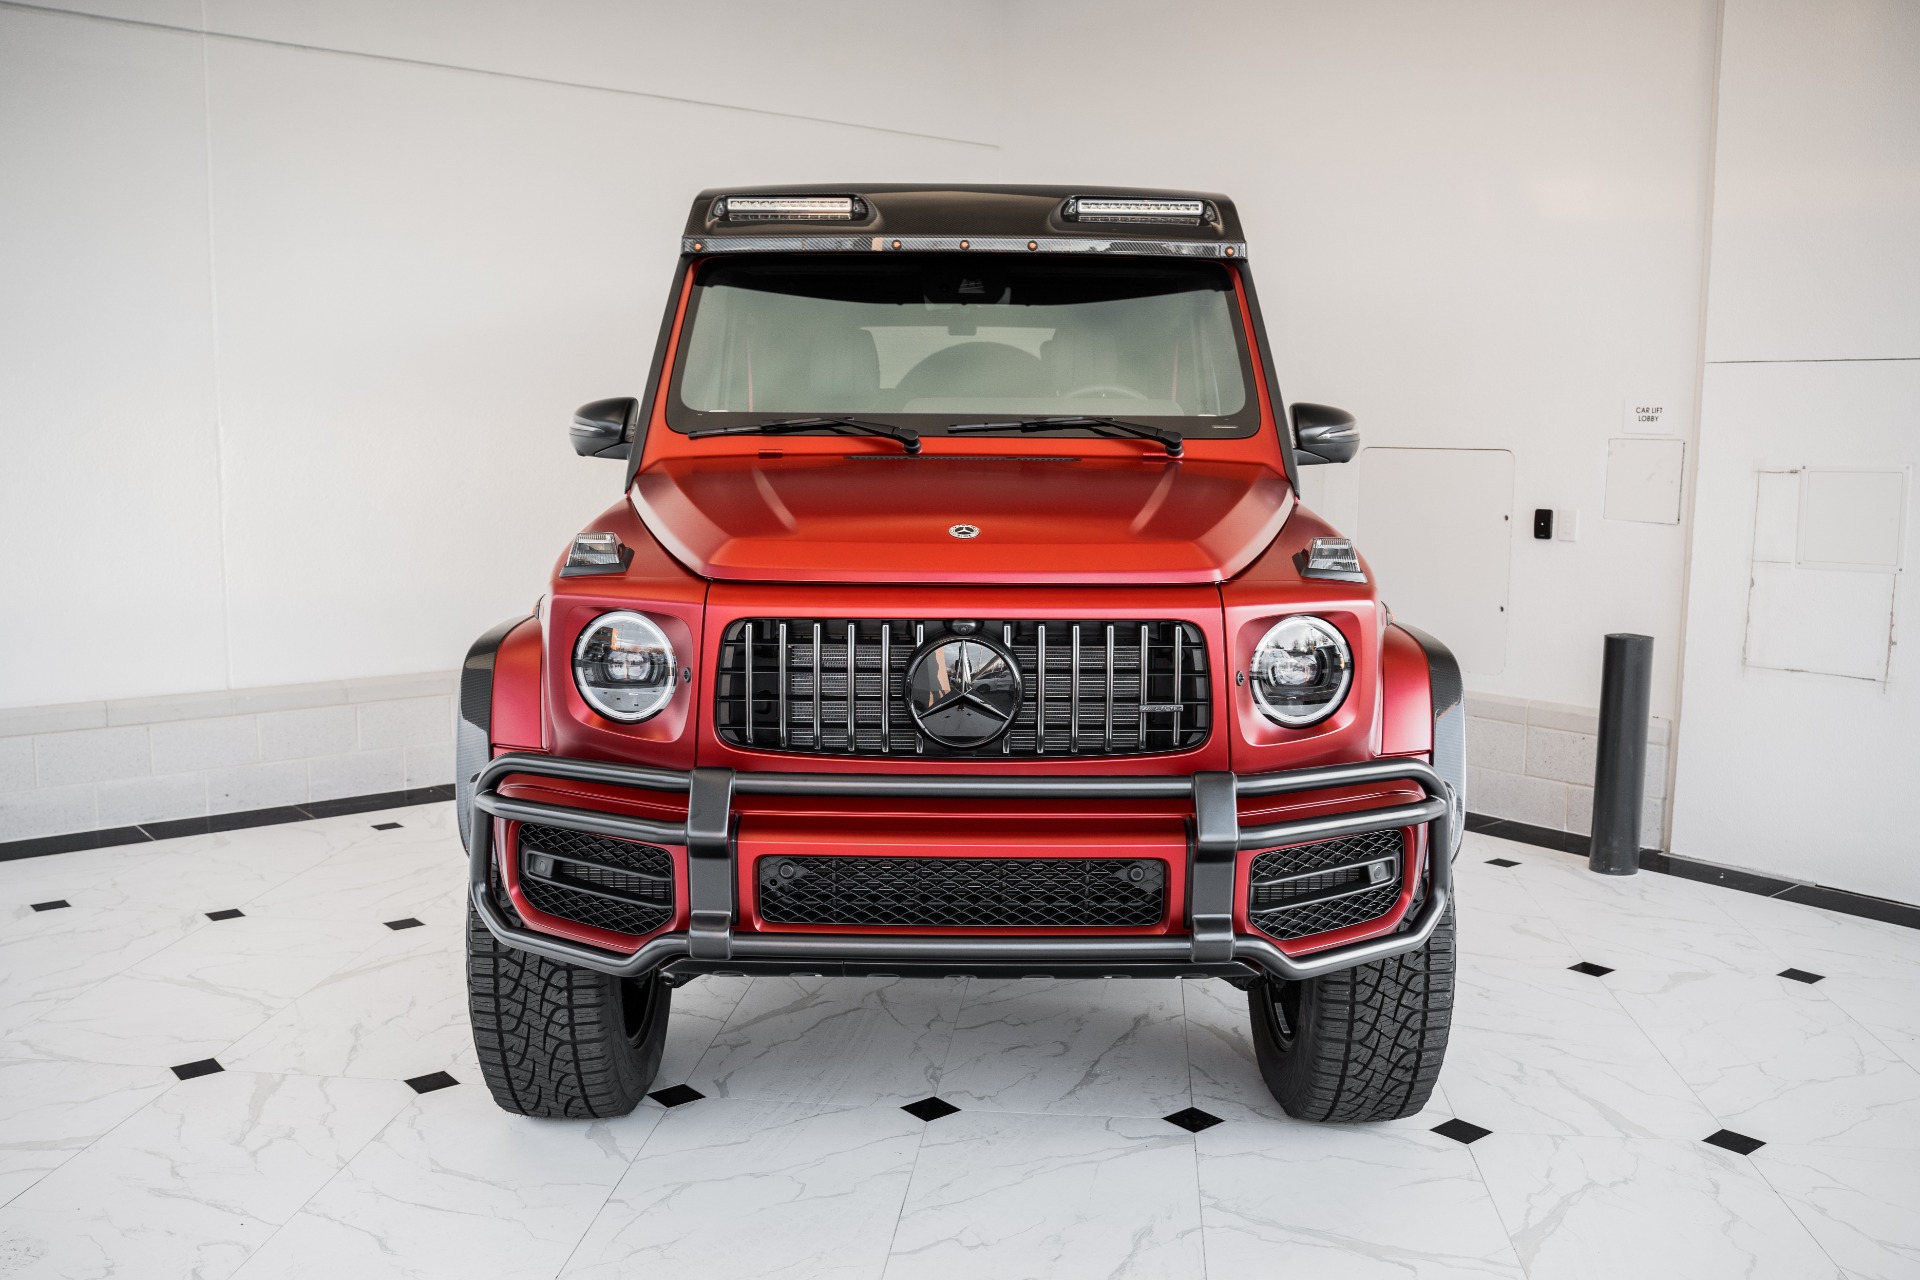 Used 2018 Mercedes-Benz G63 AMG 4x4 For Sale (Sold)